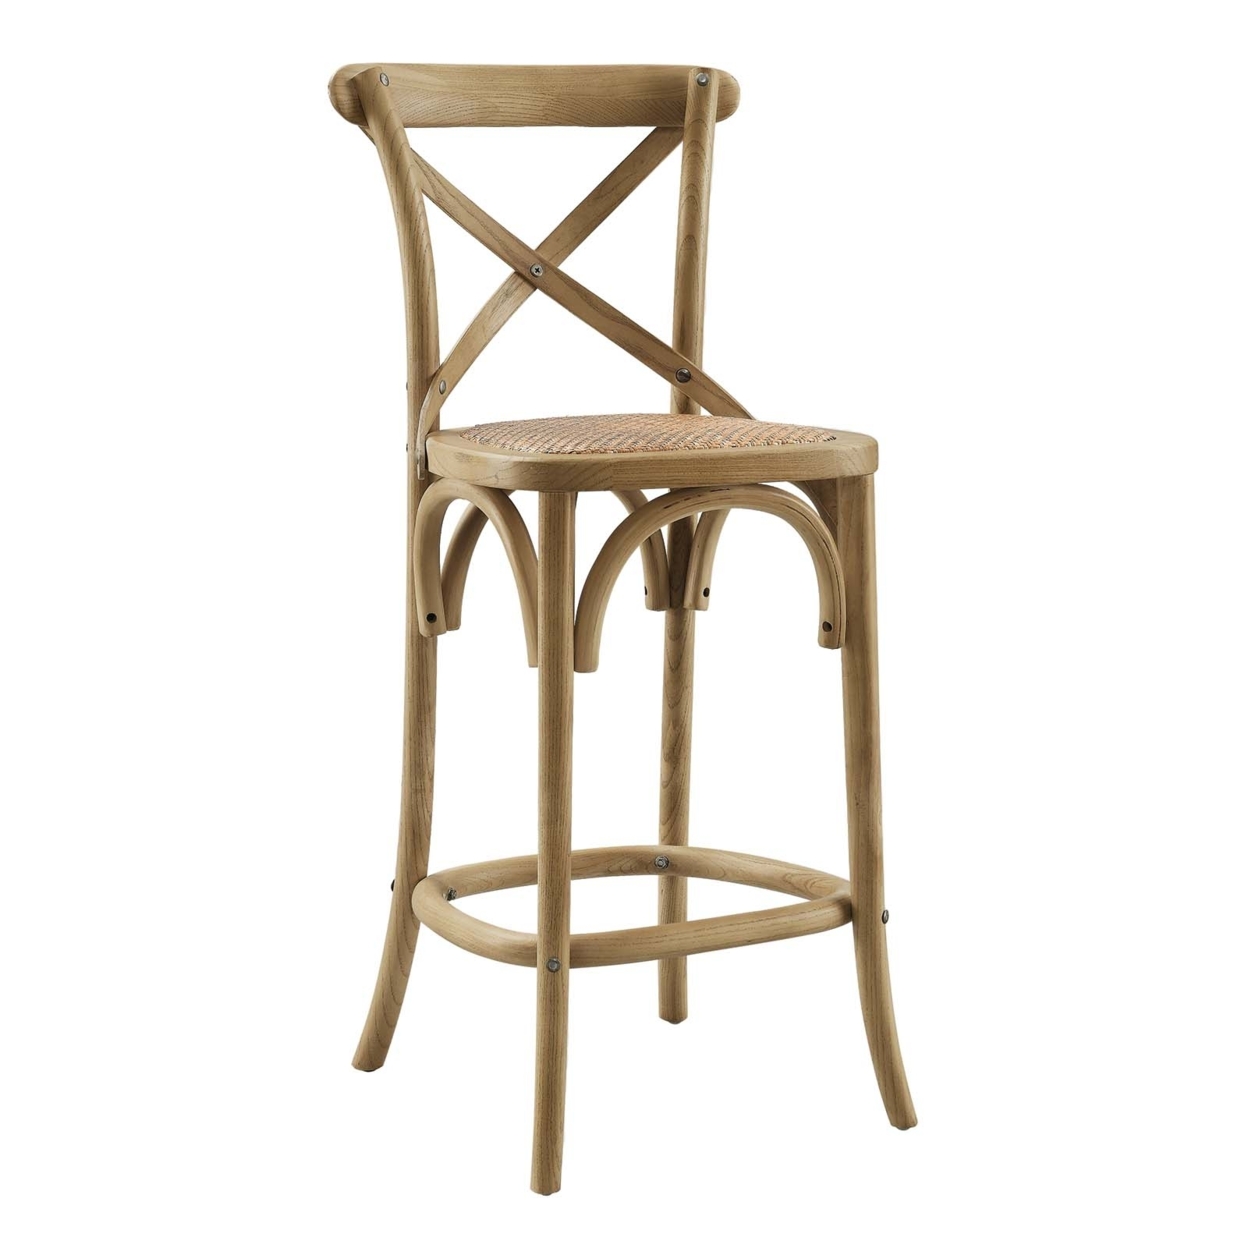 Wooden Farmhouse Counter Stool With X Brace Back And Woven Seat, Brown, Saltoro Sherpi